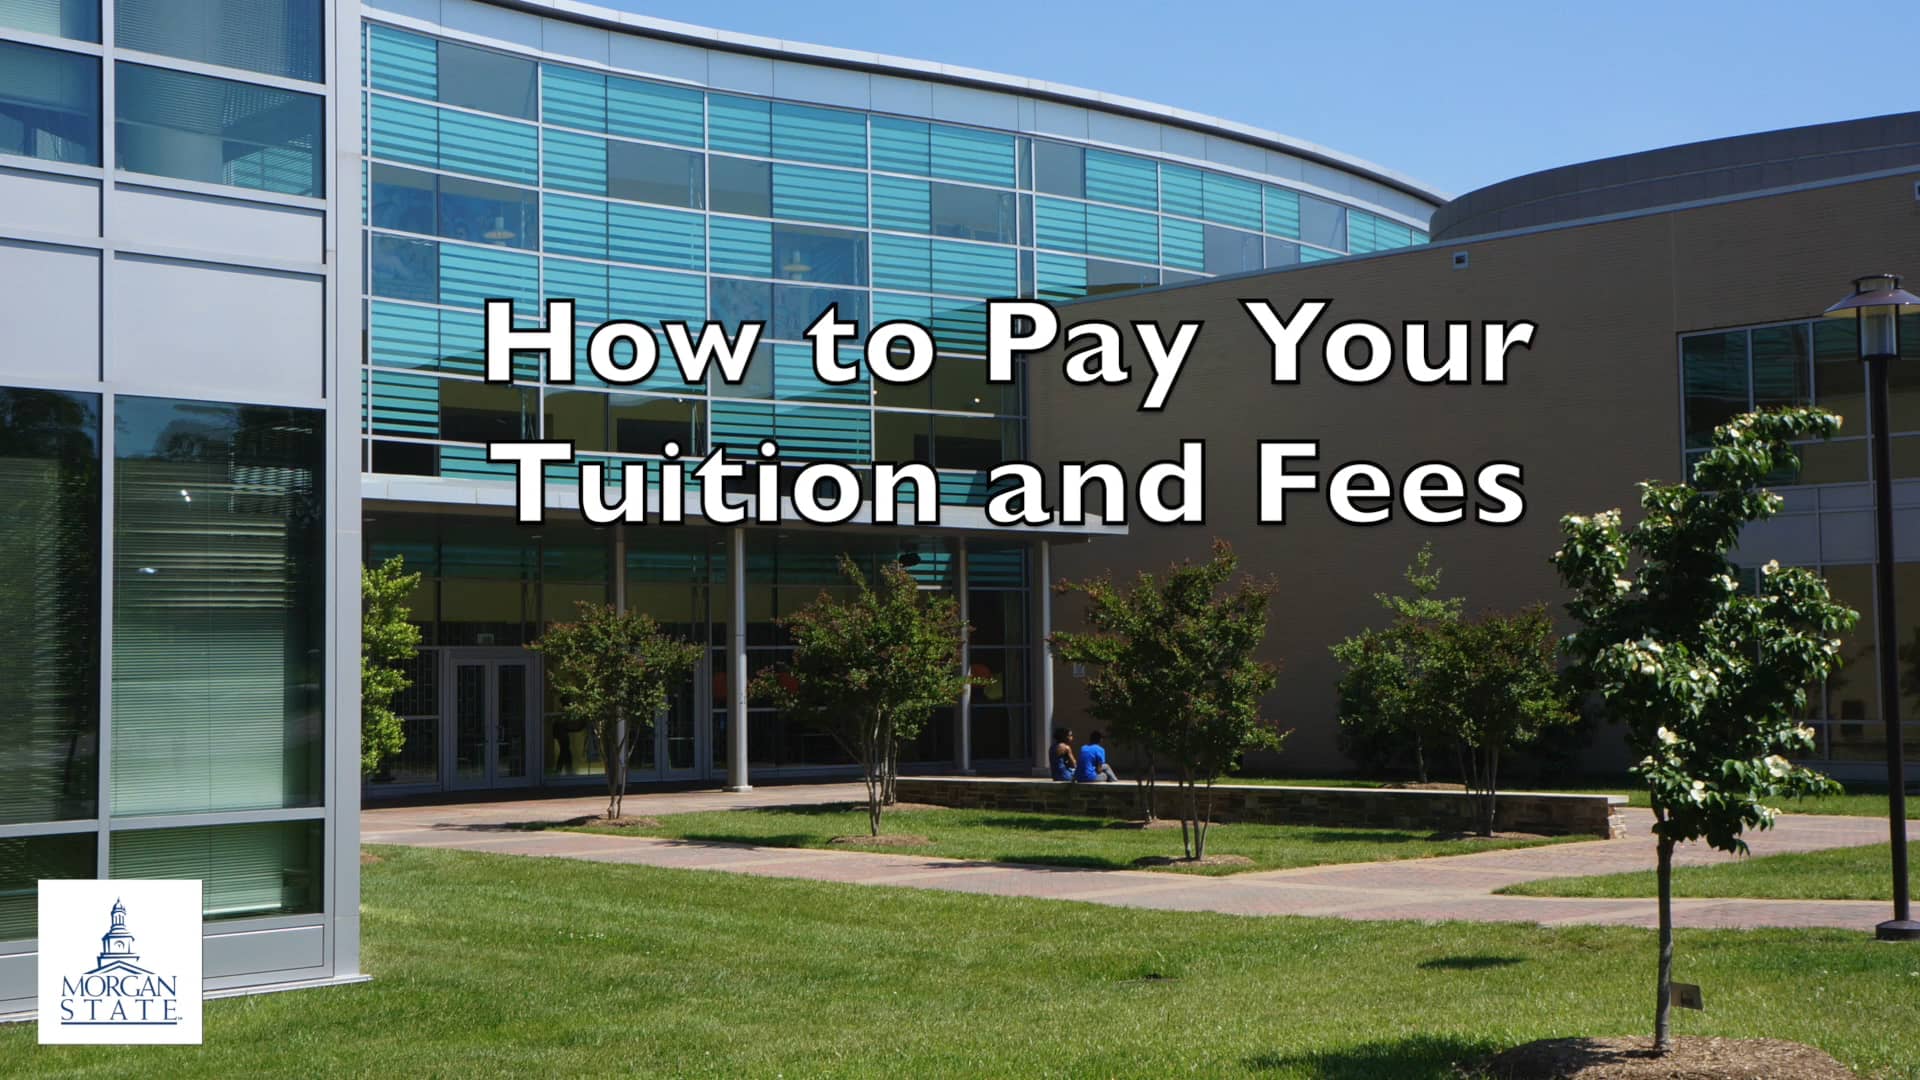 How to Pay Your Tuition and Fees at State University on Vimeo